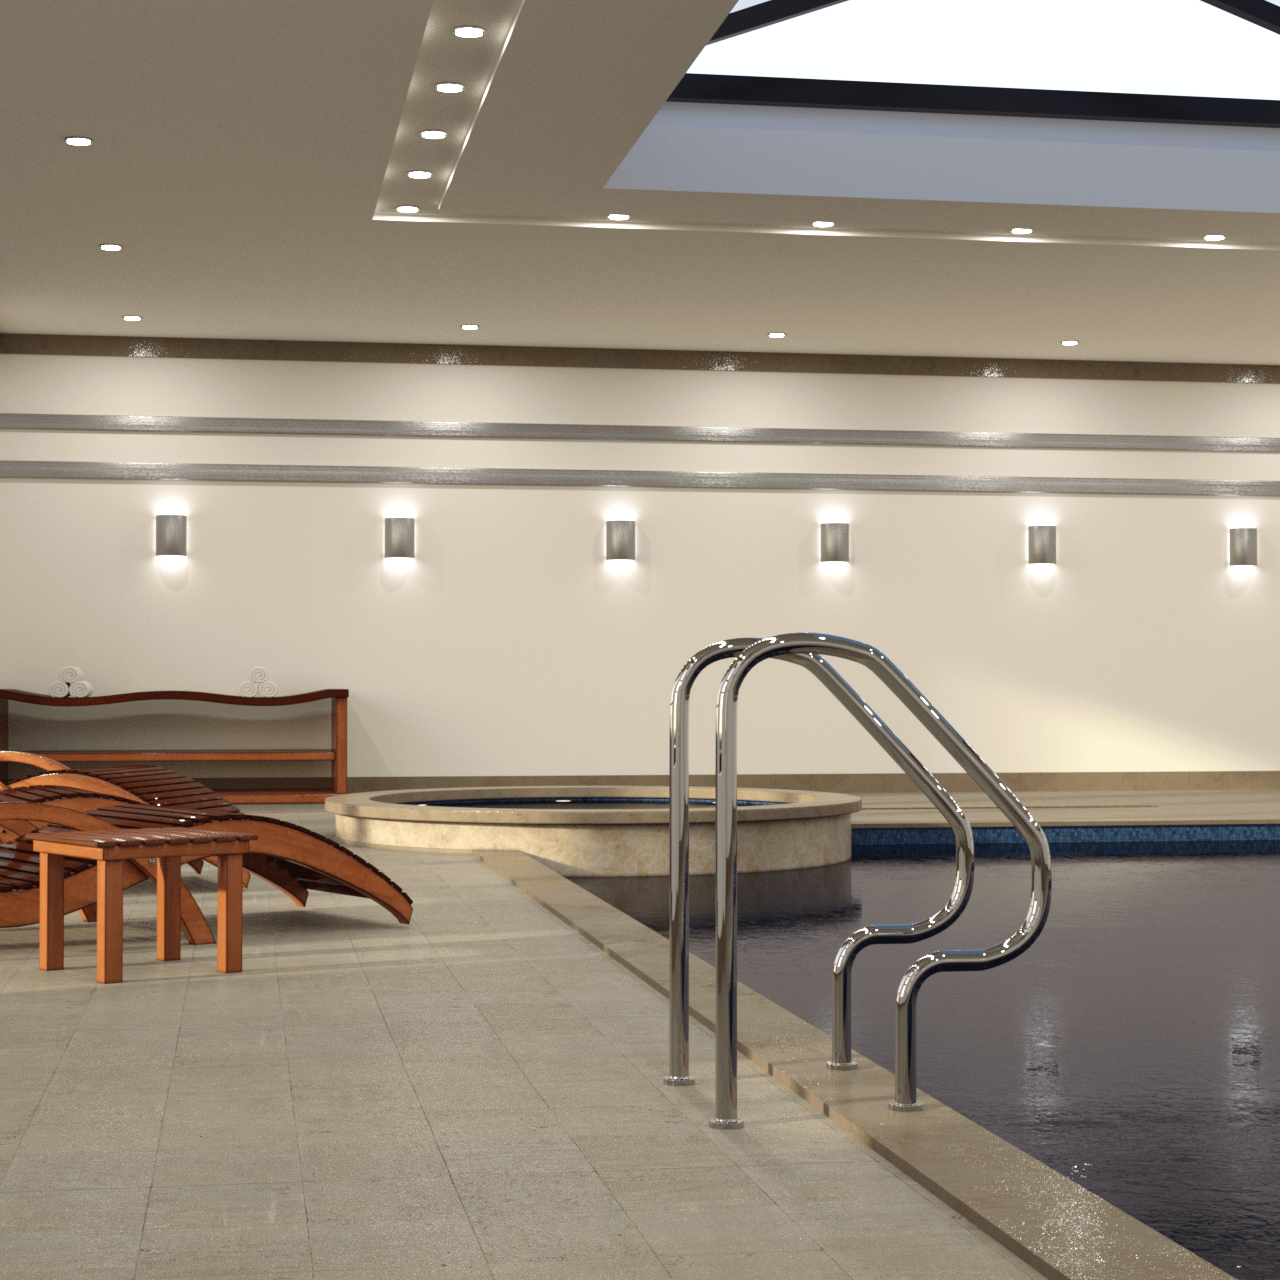 Rendering of a pool entrance and some deck chairs in the background